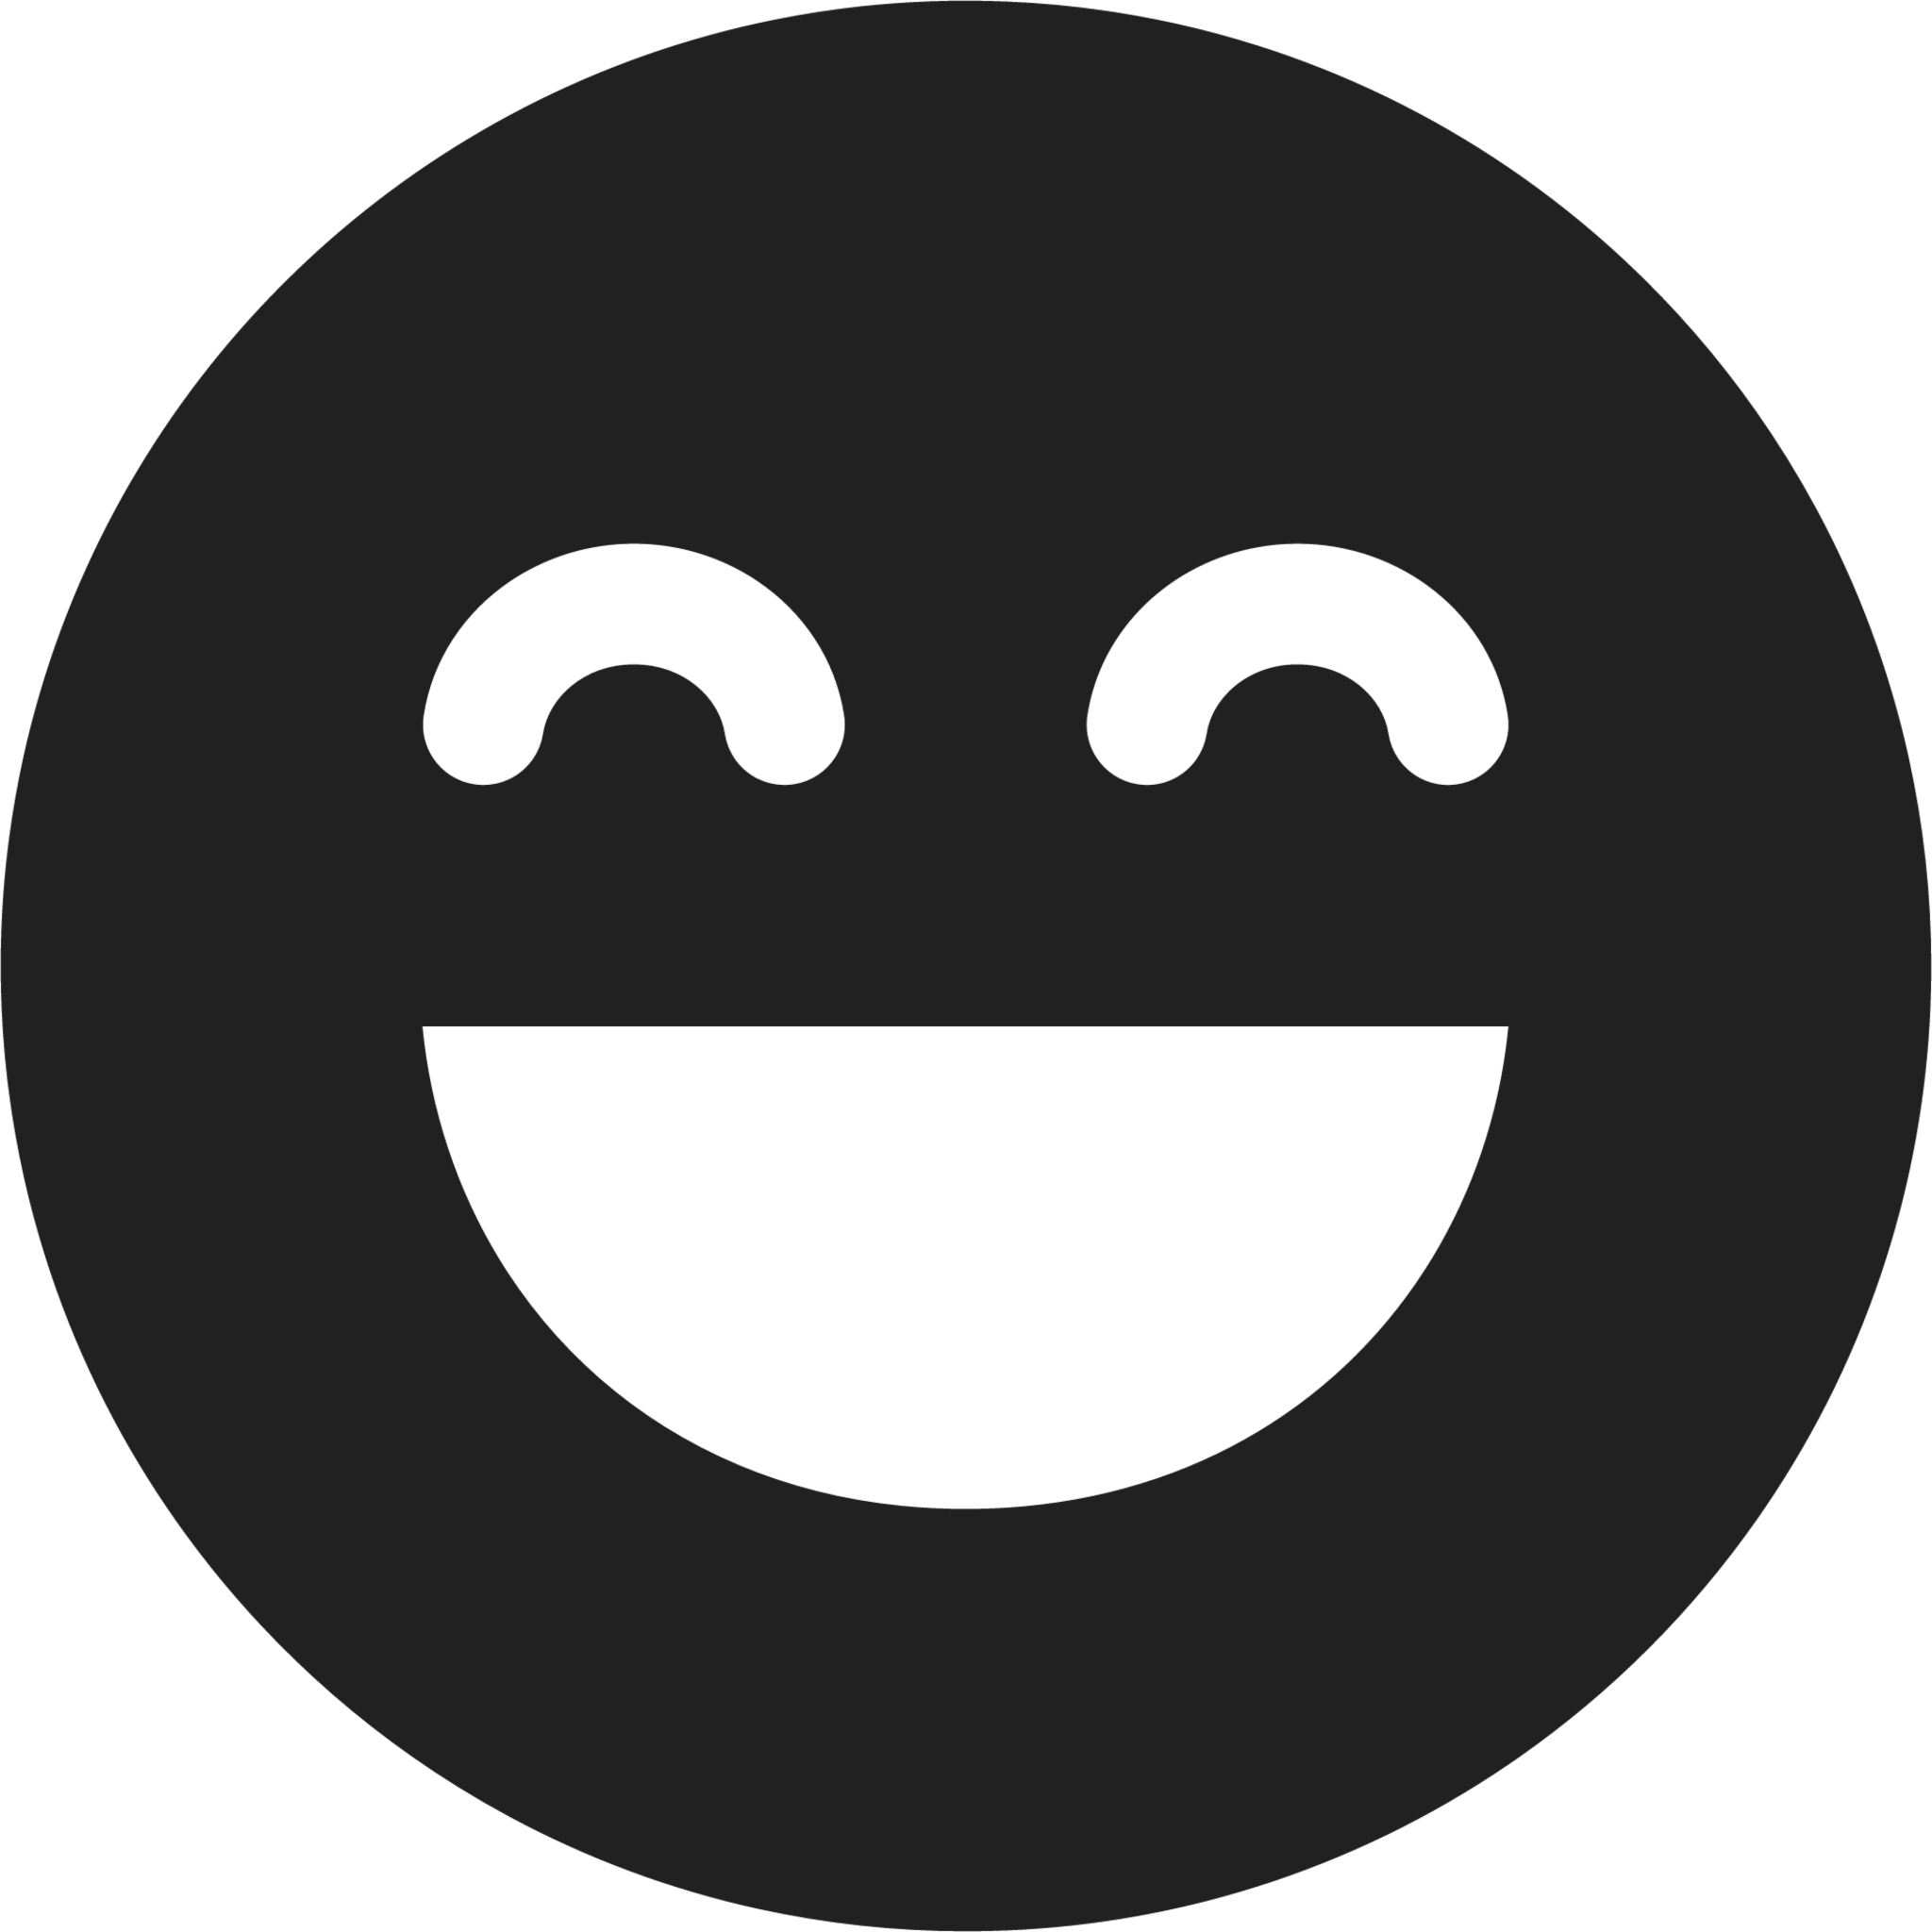 laughing smiley face black and white